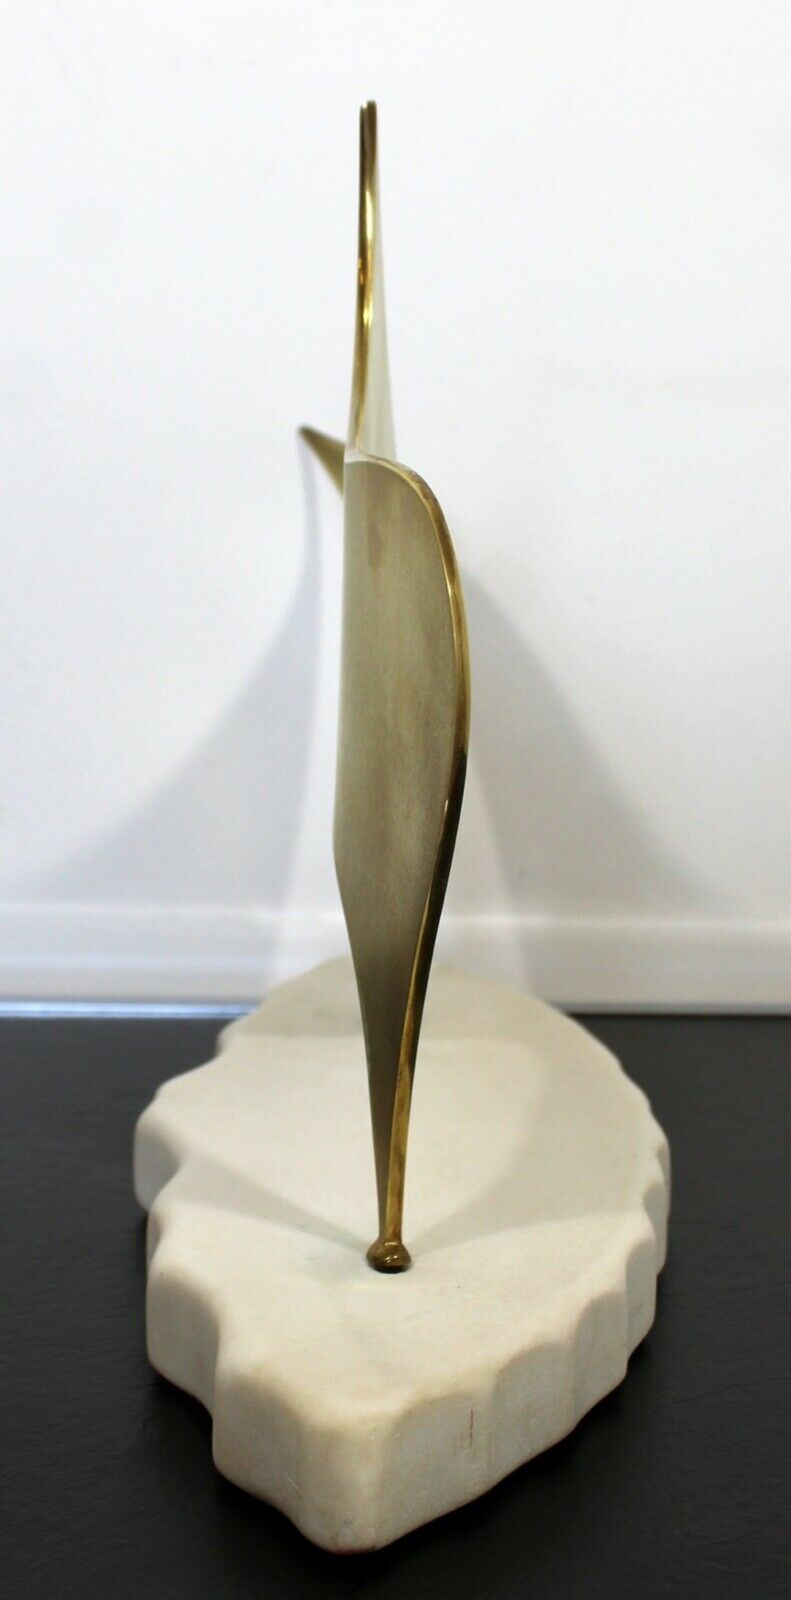 James Nani Slipper 97 Gold Abstract Marble Base Sculpture